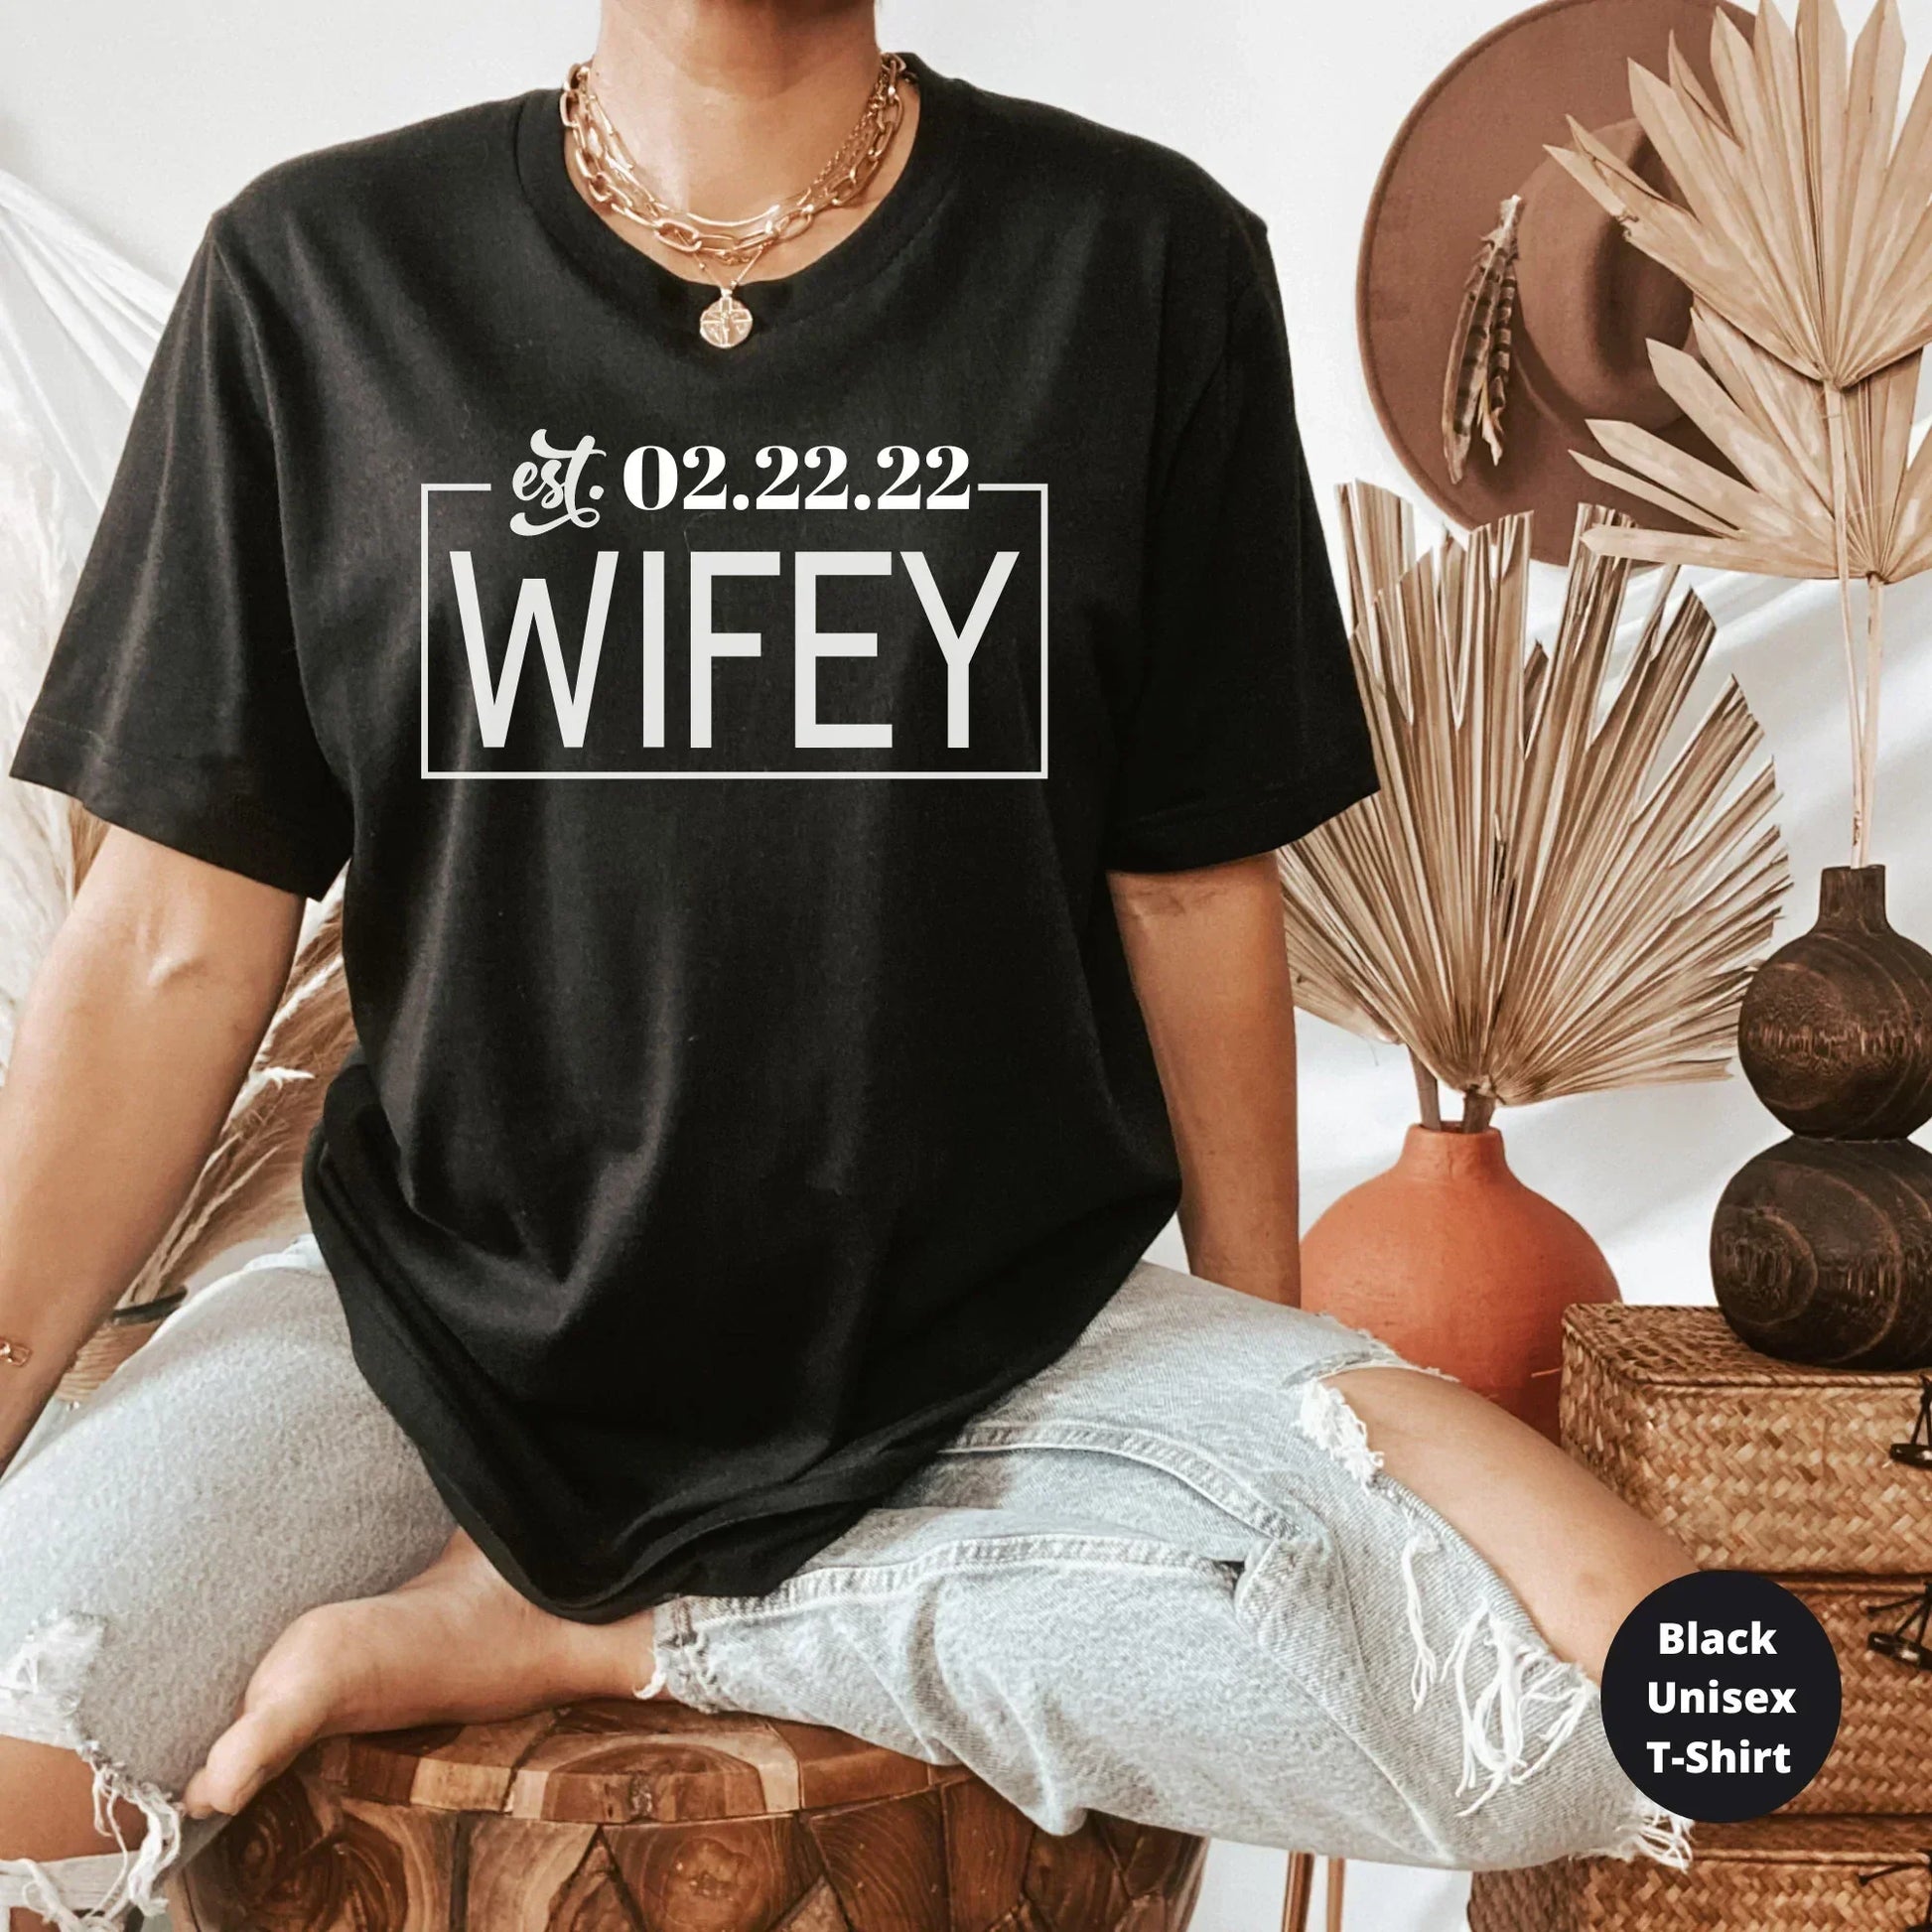 Mr and Mrs Shirts, Just Married Shirts, Mrs Sweatshirt, Wife Shirt, Wifey Sweatshirt, Future Mrs Shirt, Hubby Wifey Shirts, Wifey Hoodie